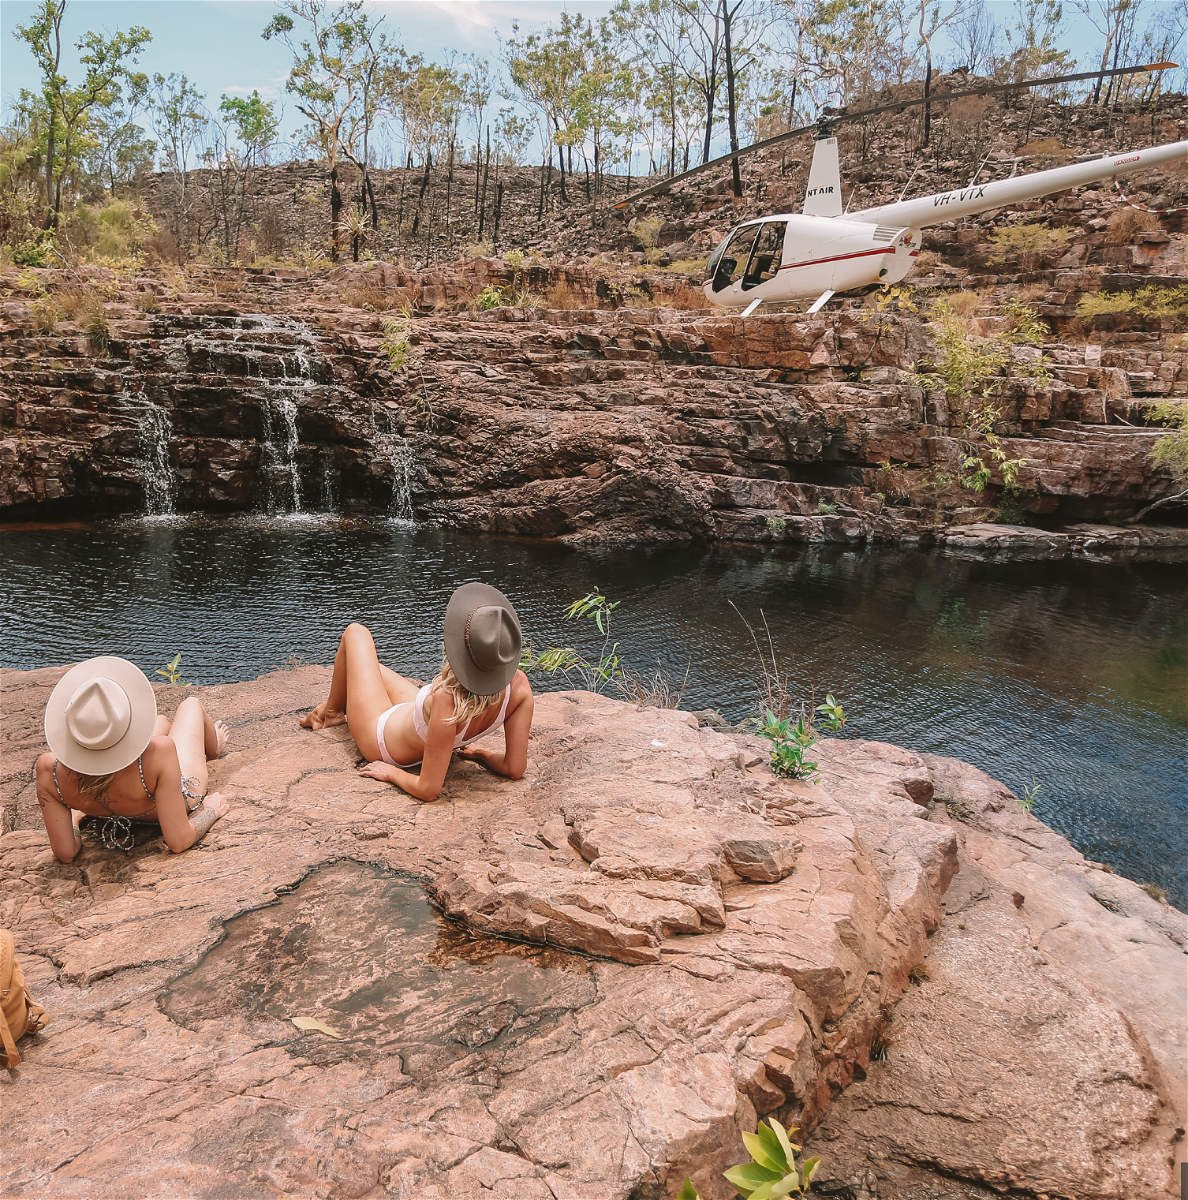 People sat near Sandy Creek and helicopter at Sandy Creek in Northern Territory